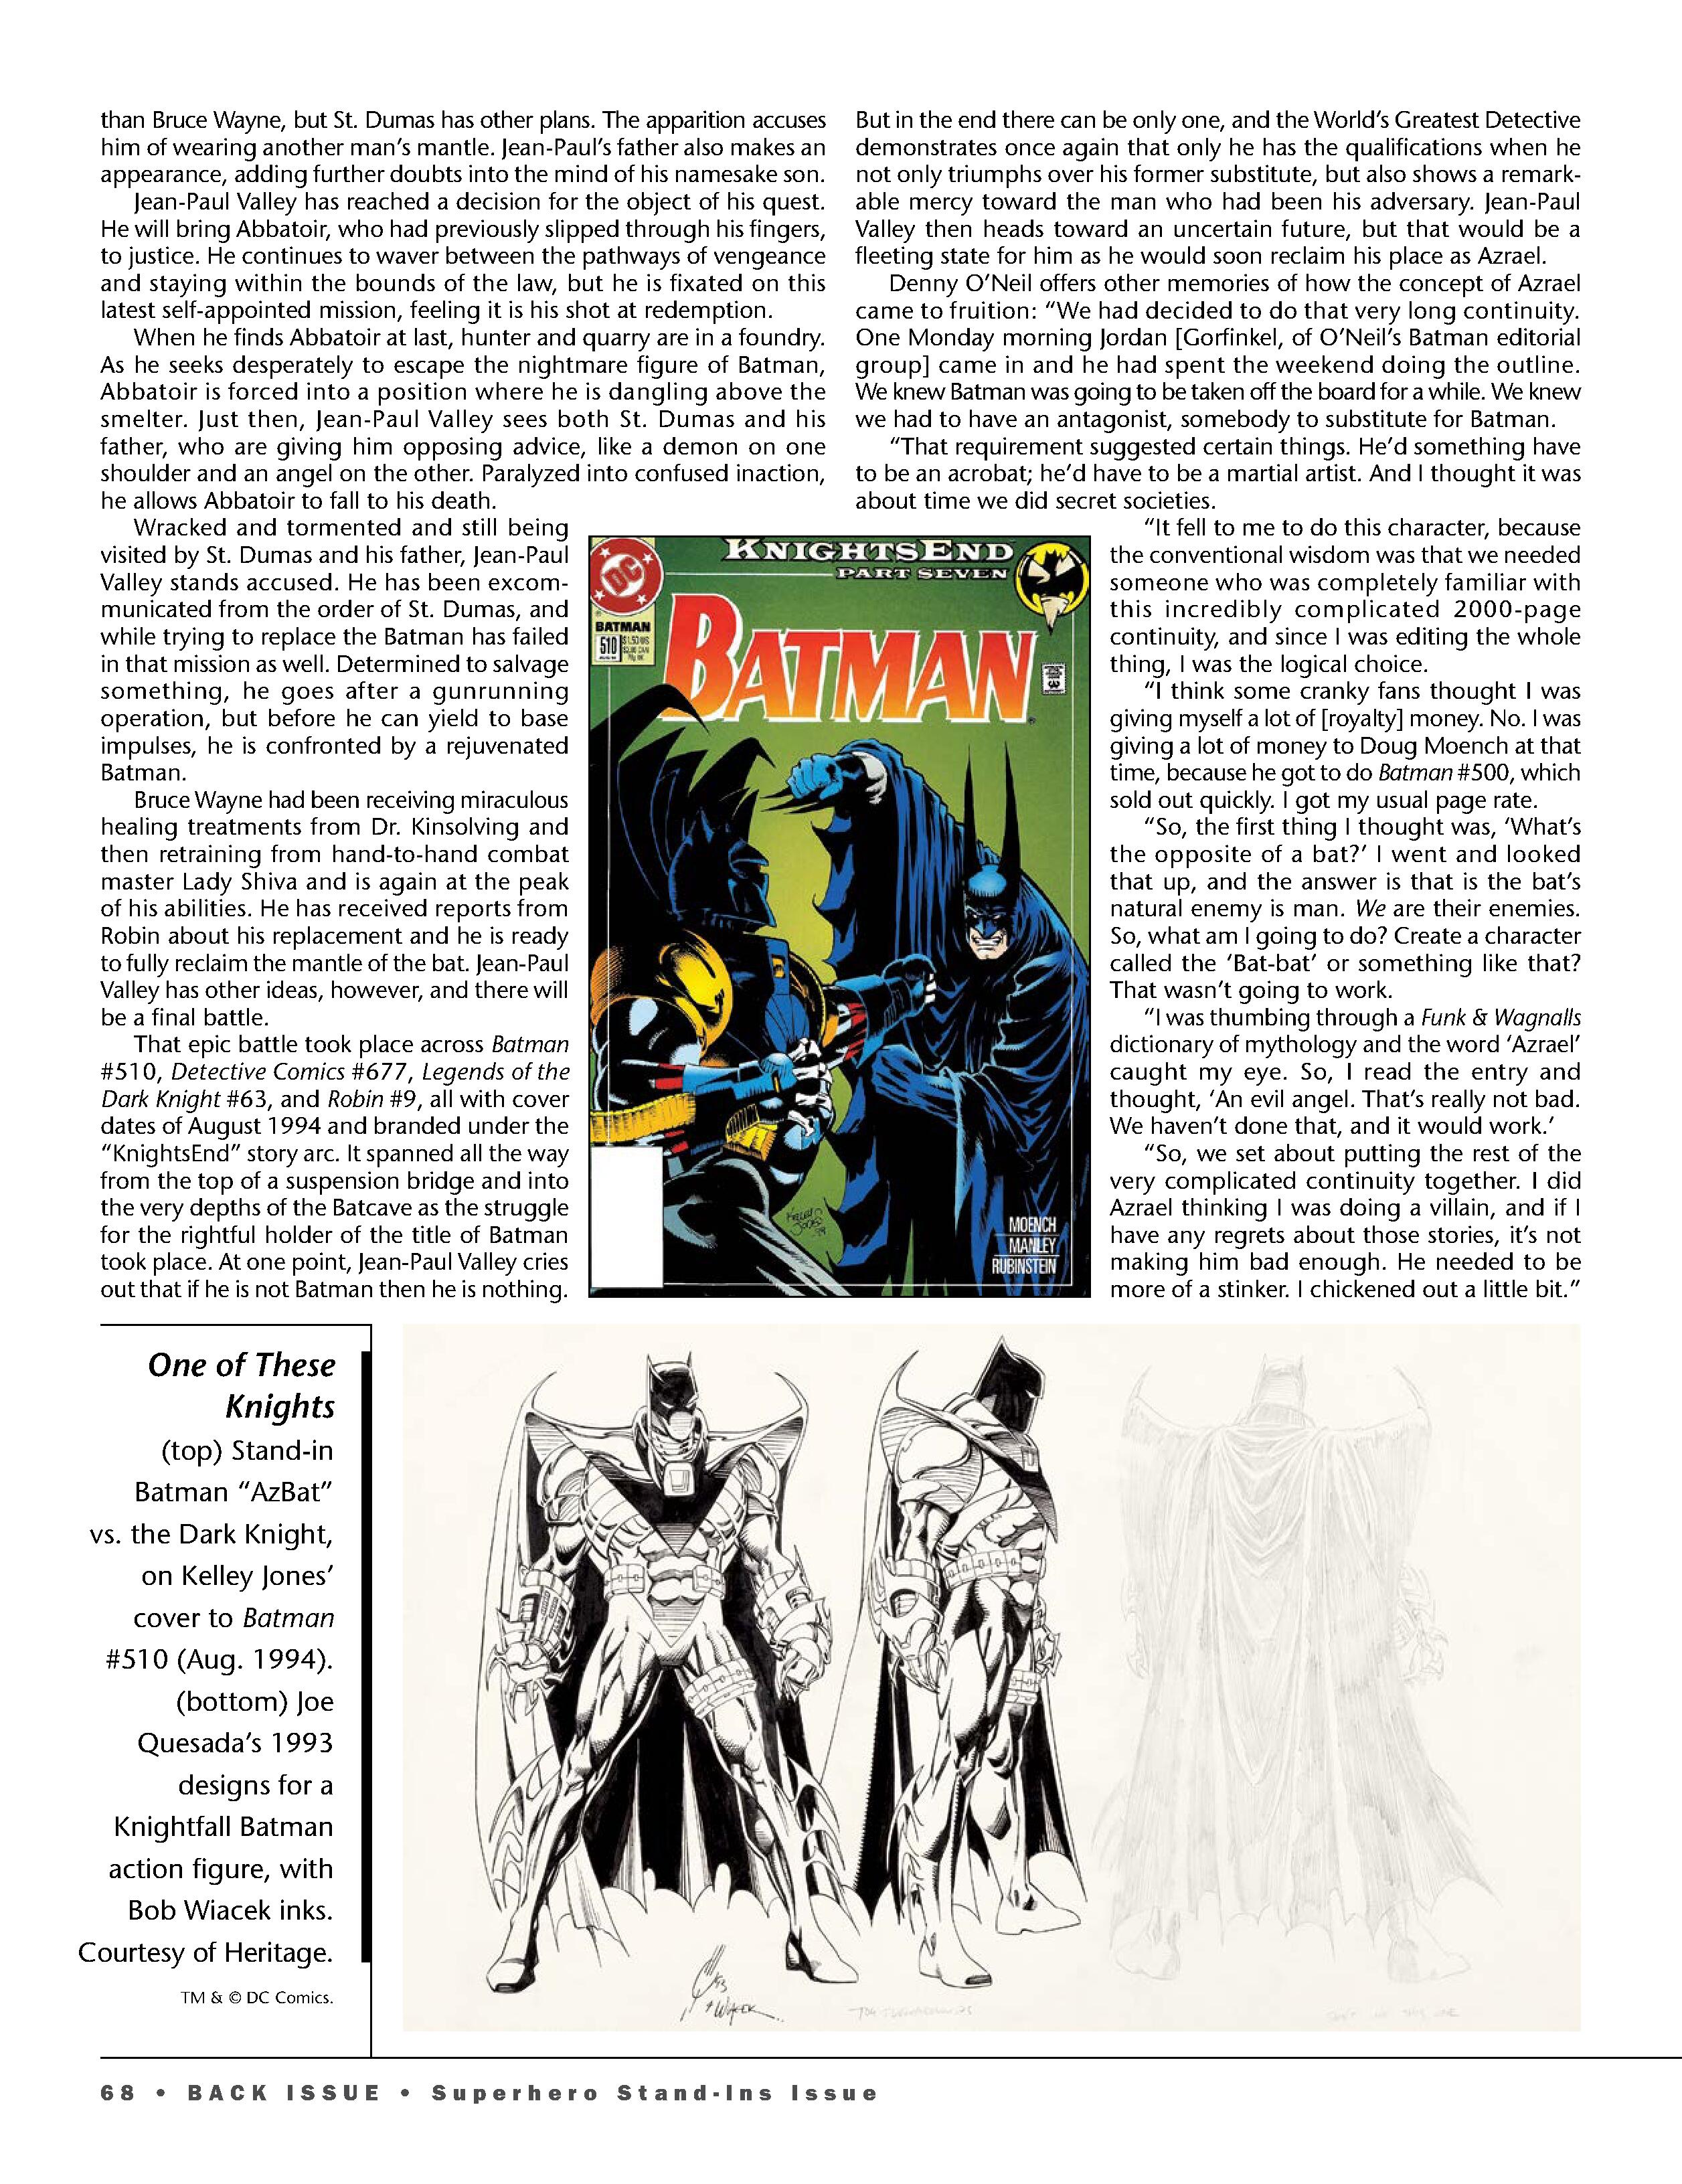 Read online Back Issue comic -  Issue #117 - 70